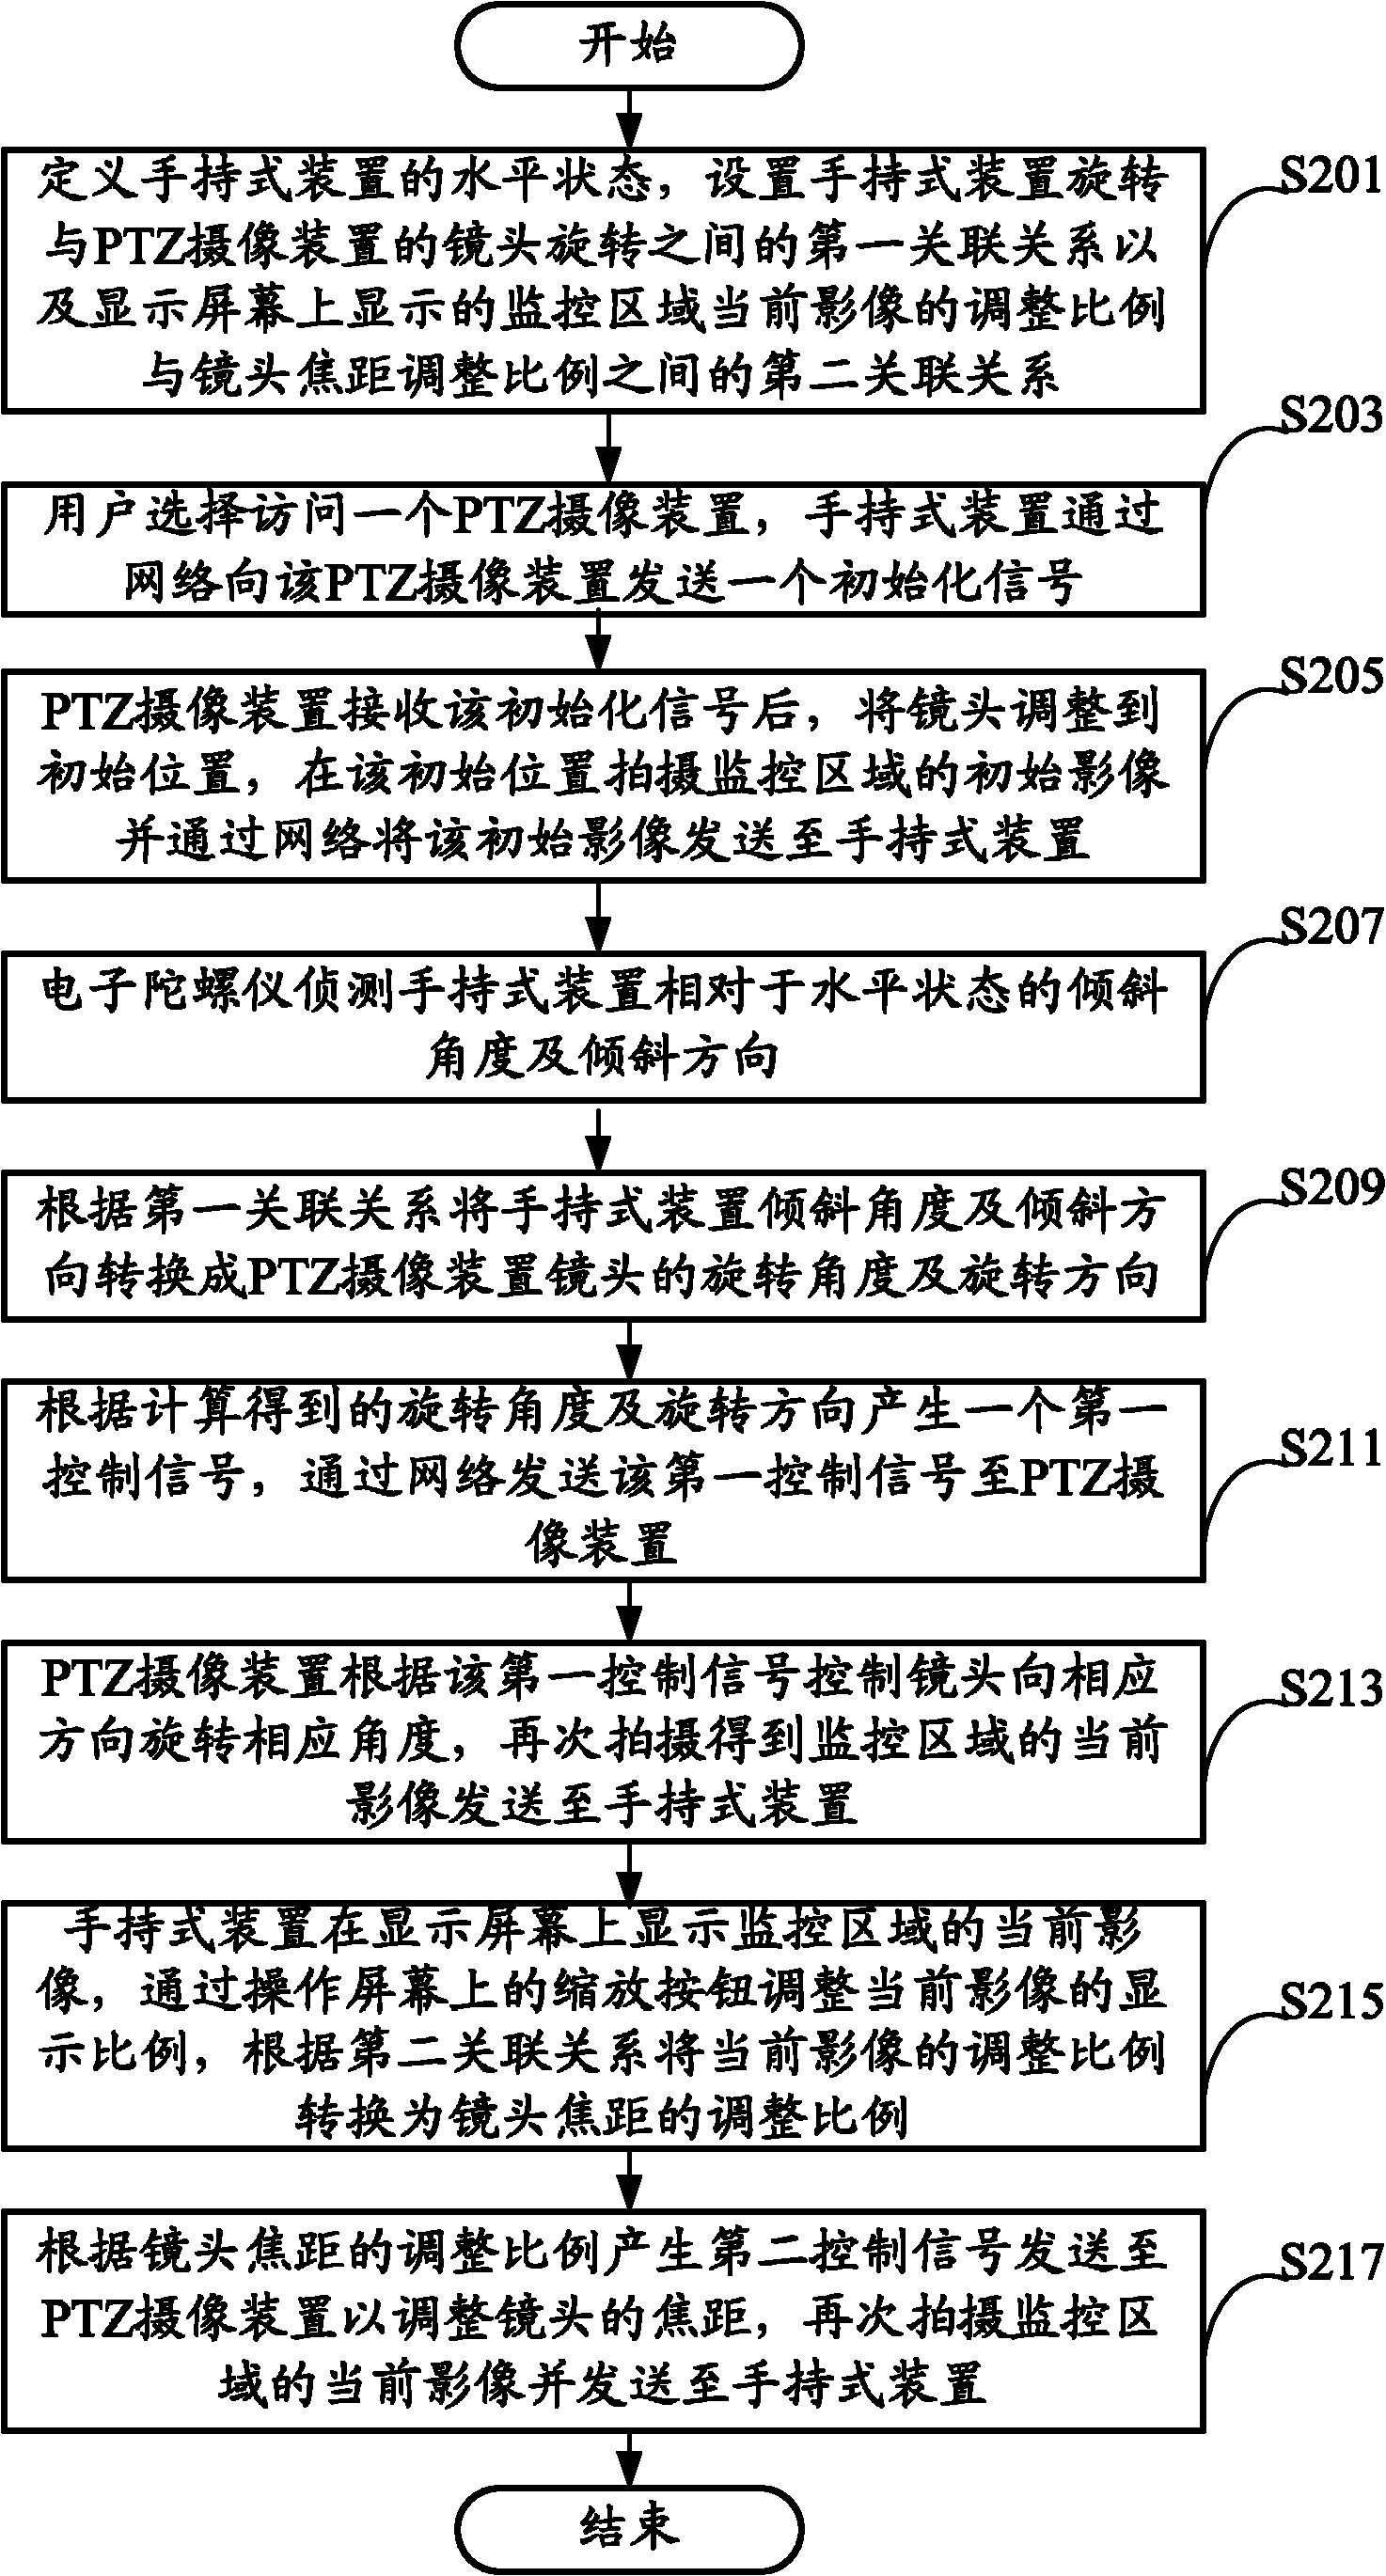 Control system and method of PTZ (Pan Tilt Zoom) photographic device